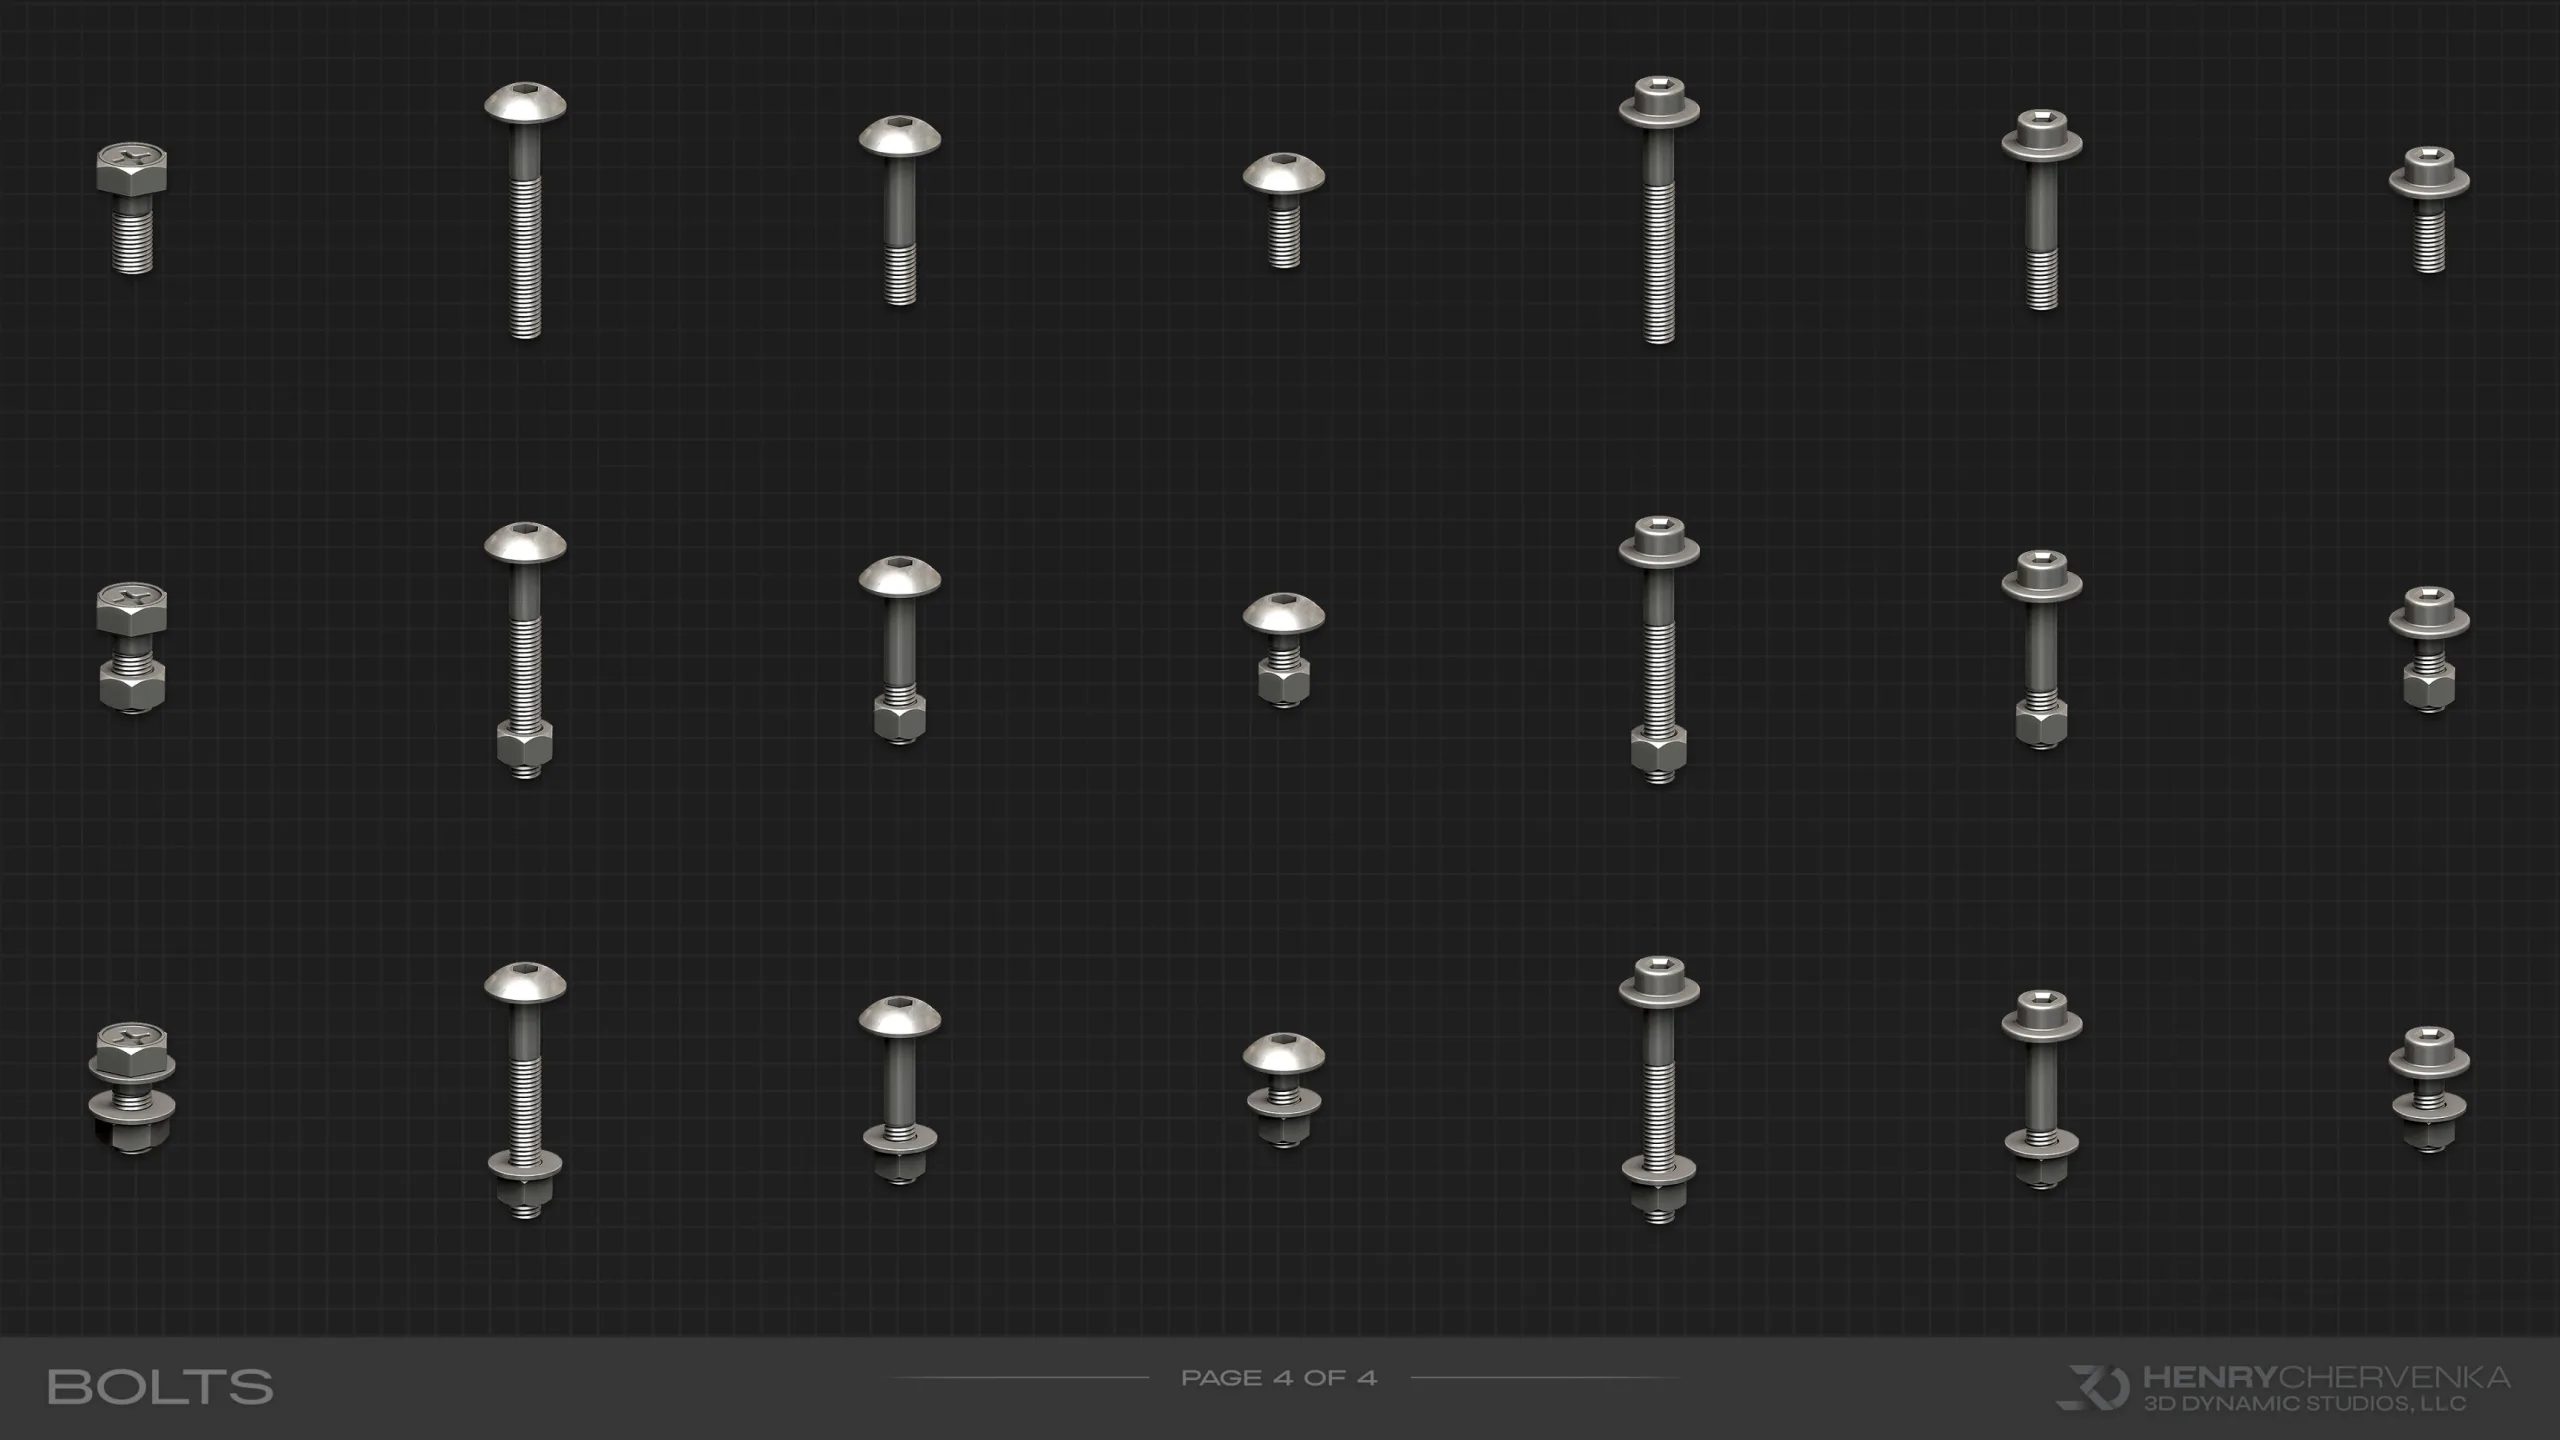 Fastener Zbrush IMM Pack // 300 Screws, Bolts, Nuts & More